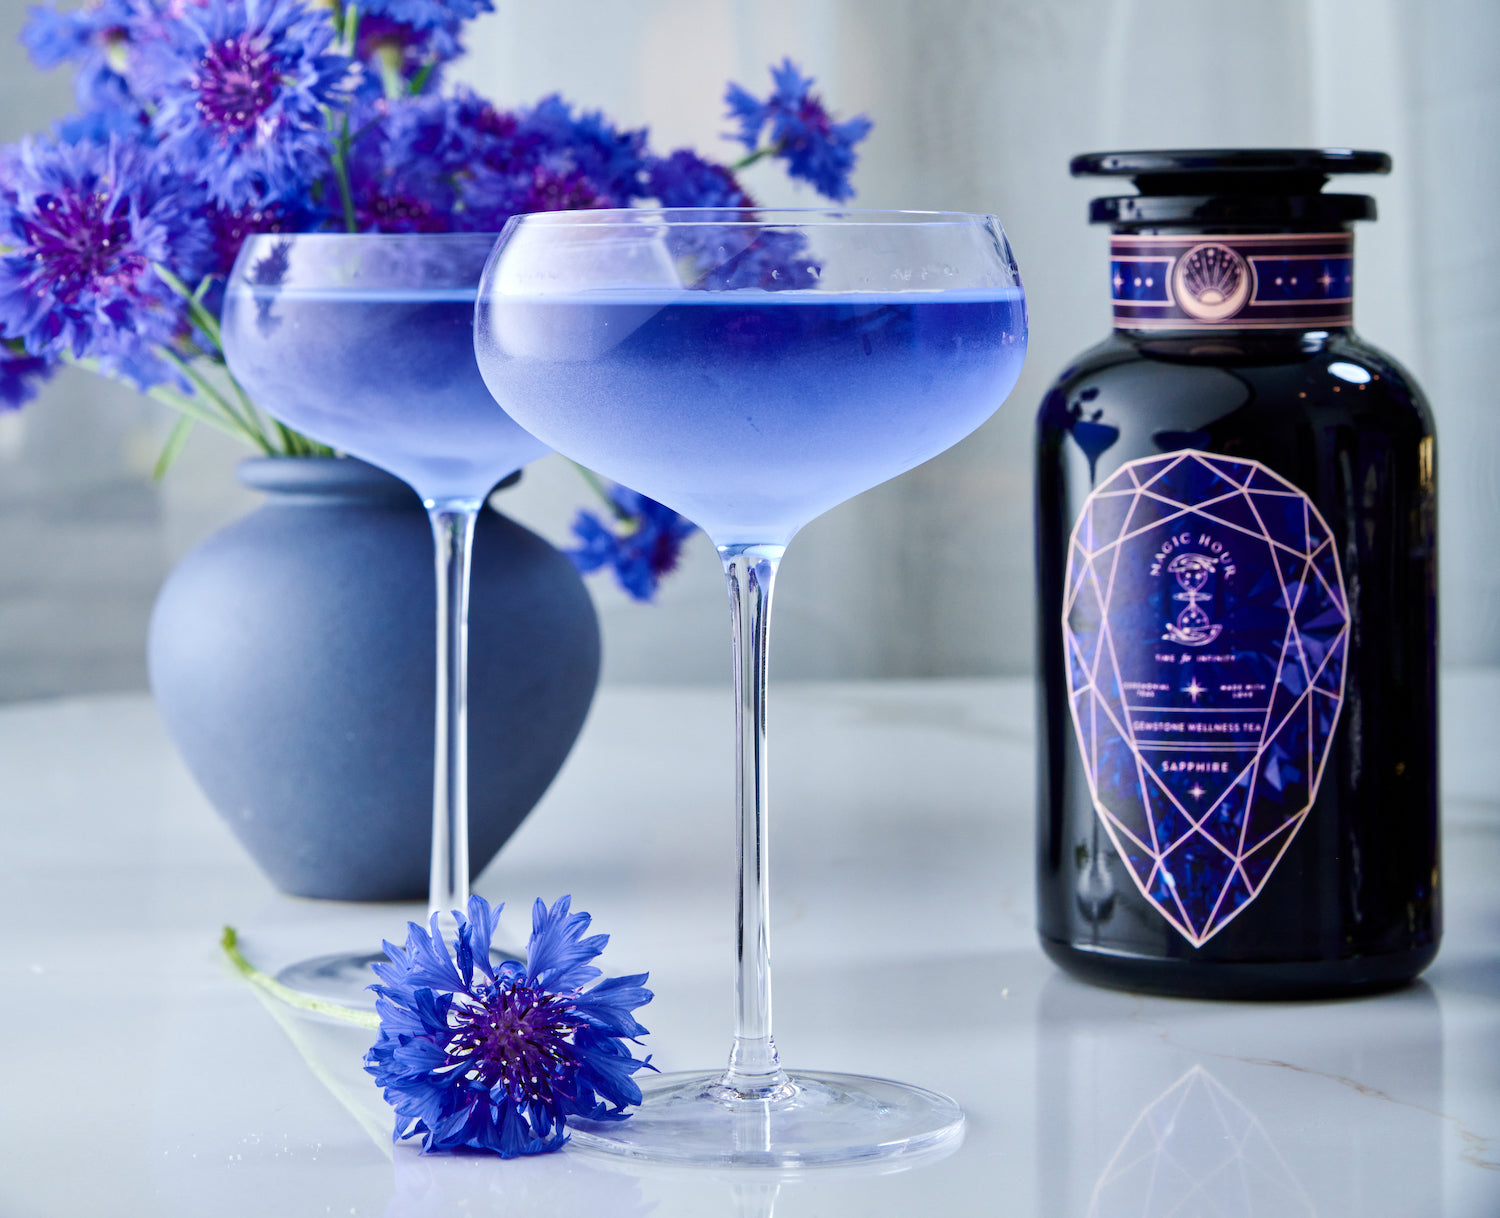 Butterfly Pea Flower: The Secret To Glowing Skin - Magic Hour